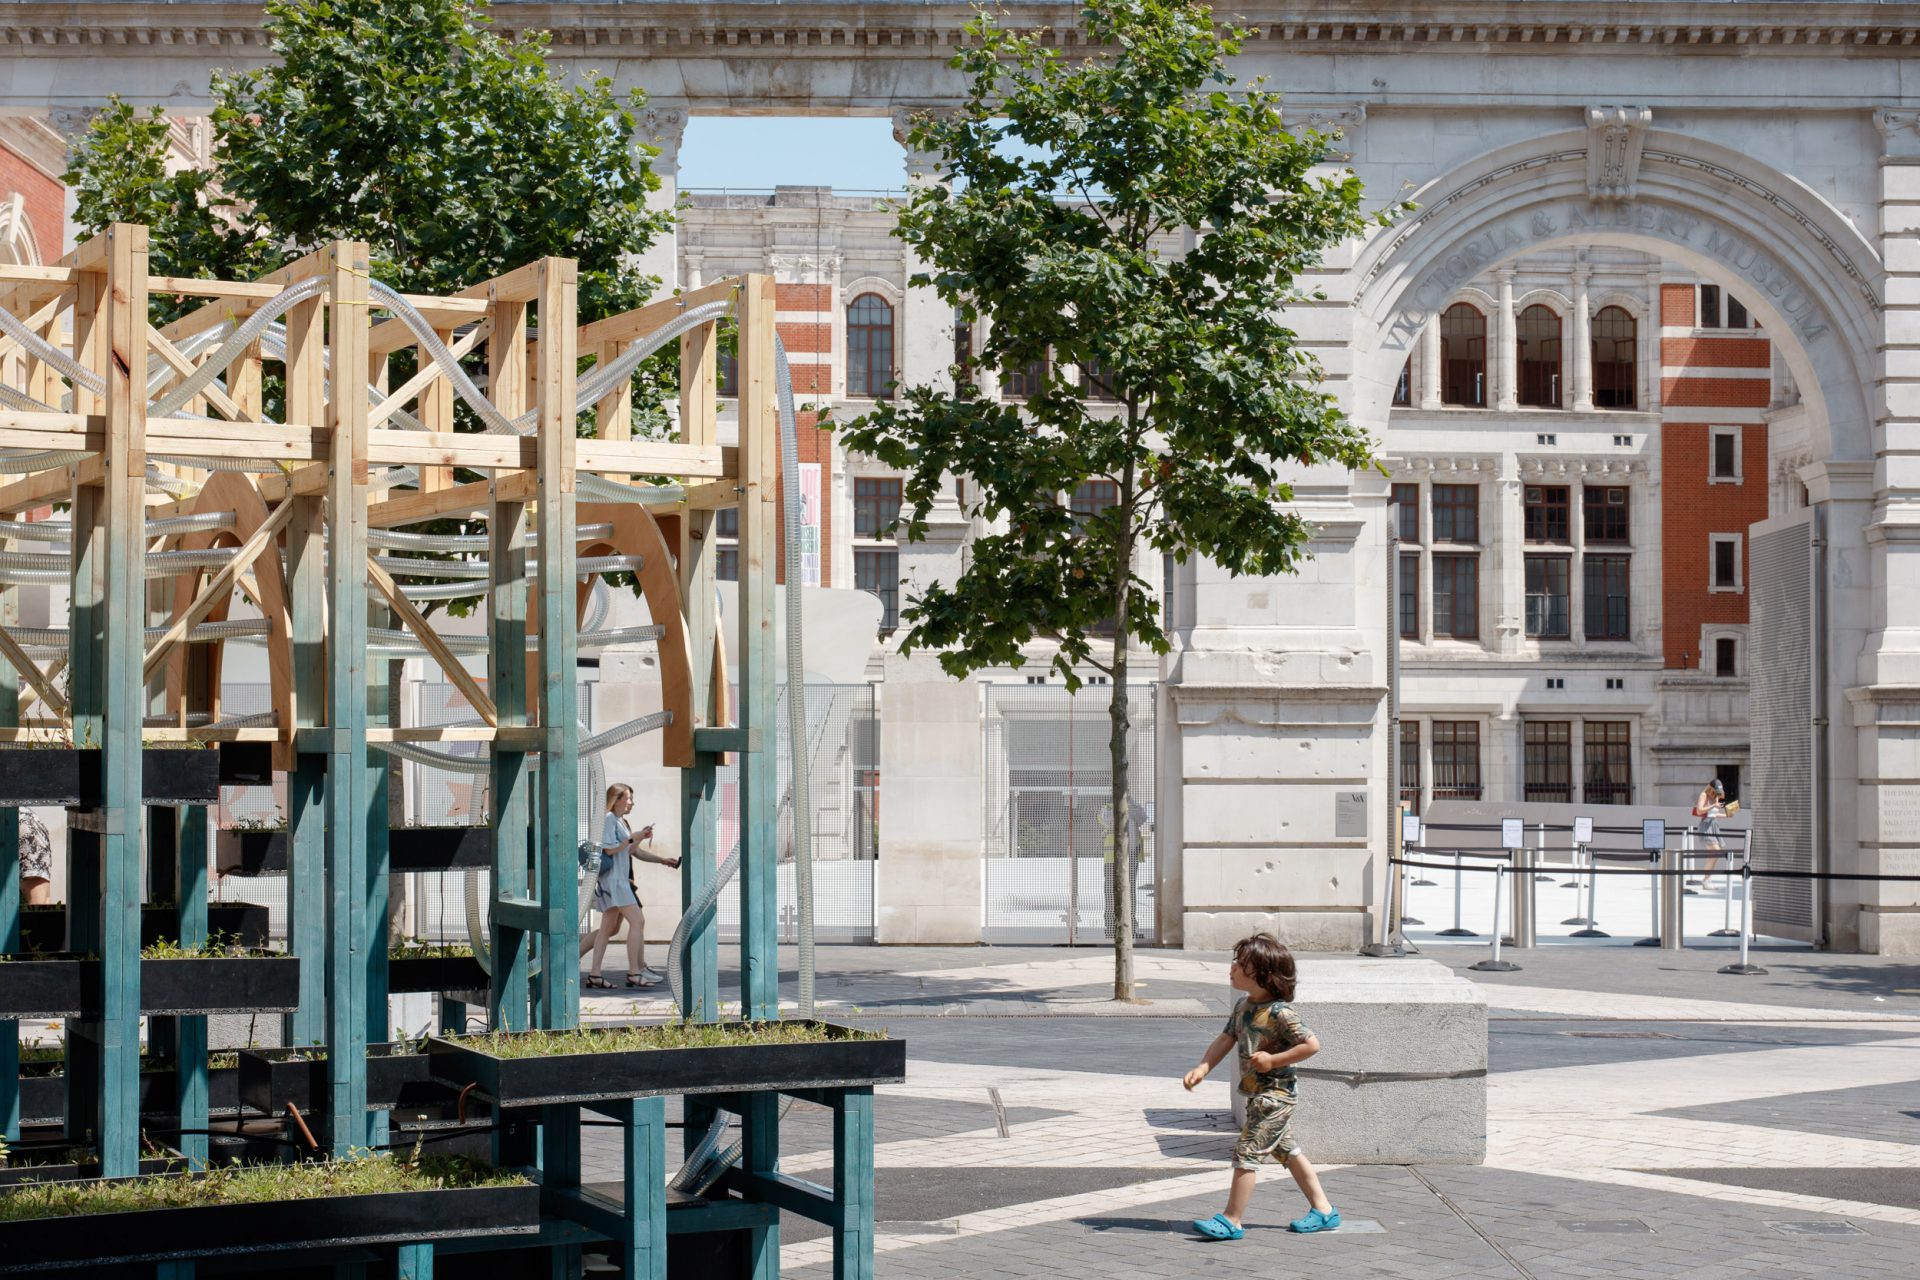 South Ken Green Trail: Installations Revealed